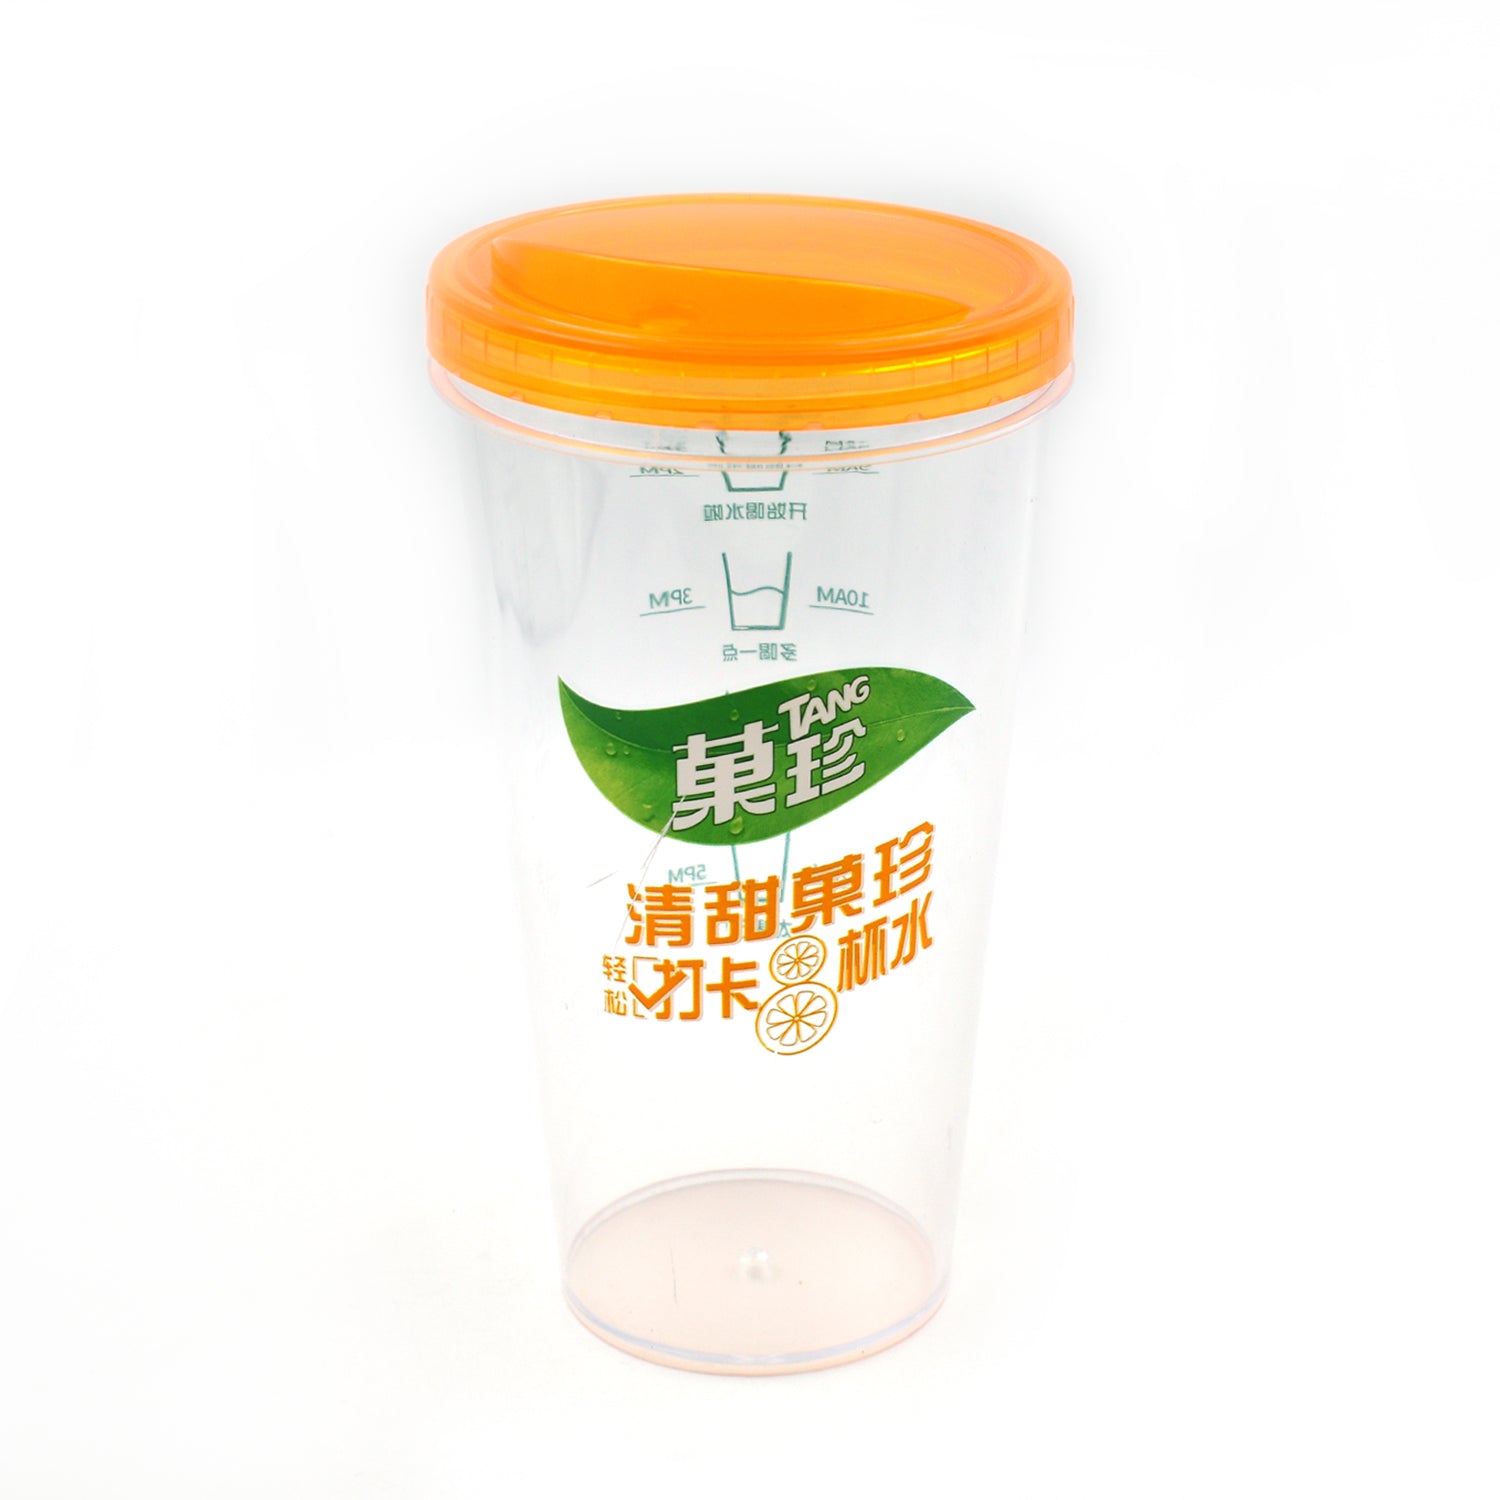 8201 Plastic Water, Coffee Cup For Home Outdoor Works, Appreciation and Motivation Portable Plastic Coffee Cup / Tumbler for Travel, Home, Office, Gift for Travel Lovers